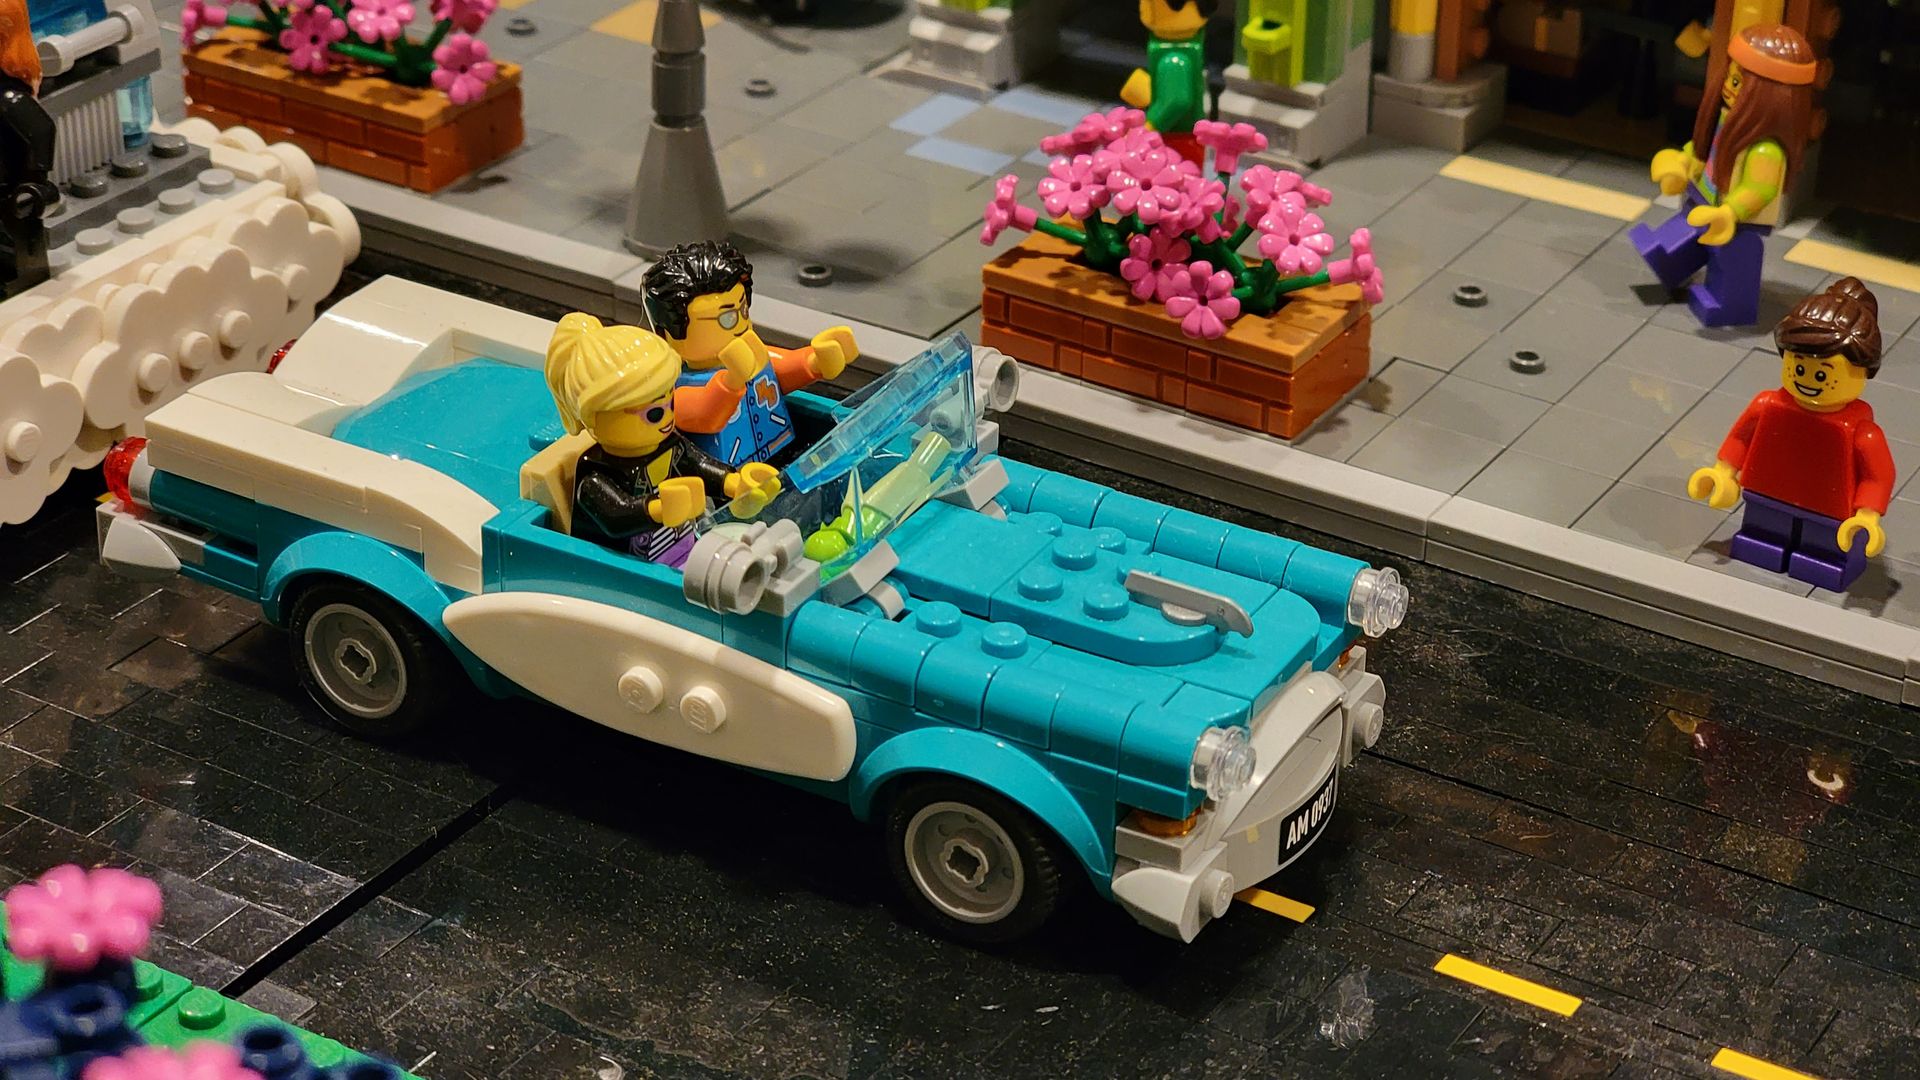 A blue Lego car with two Lego people inside driving on a street made of Legos